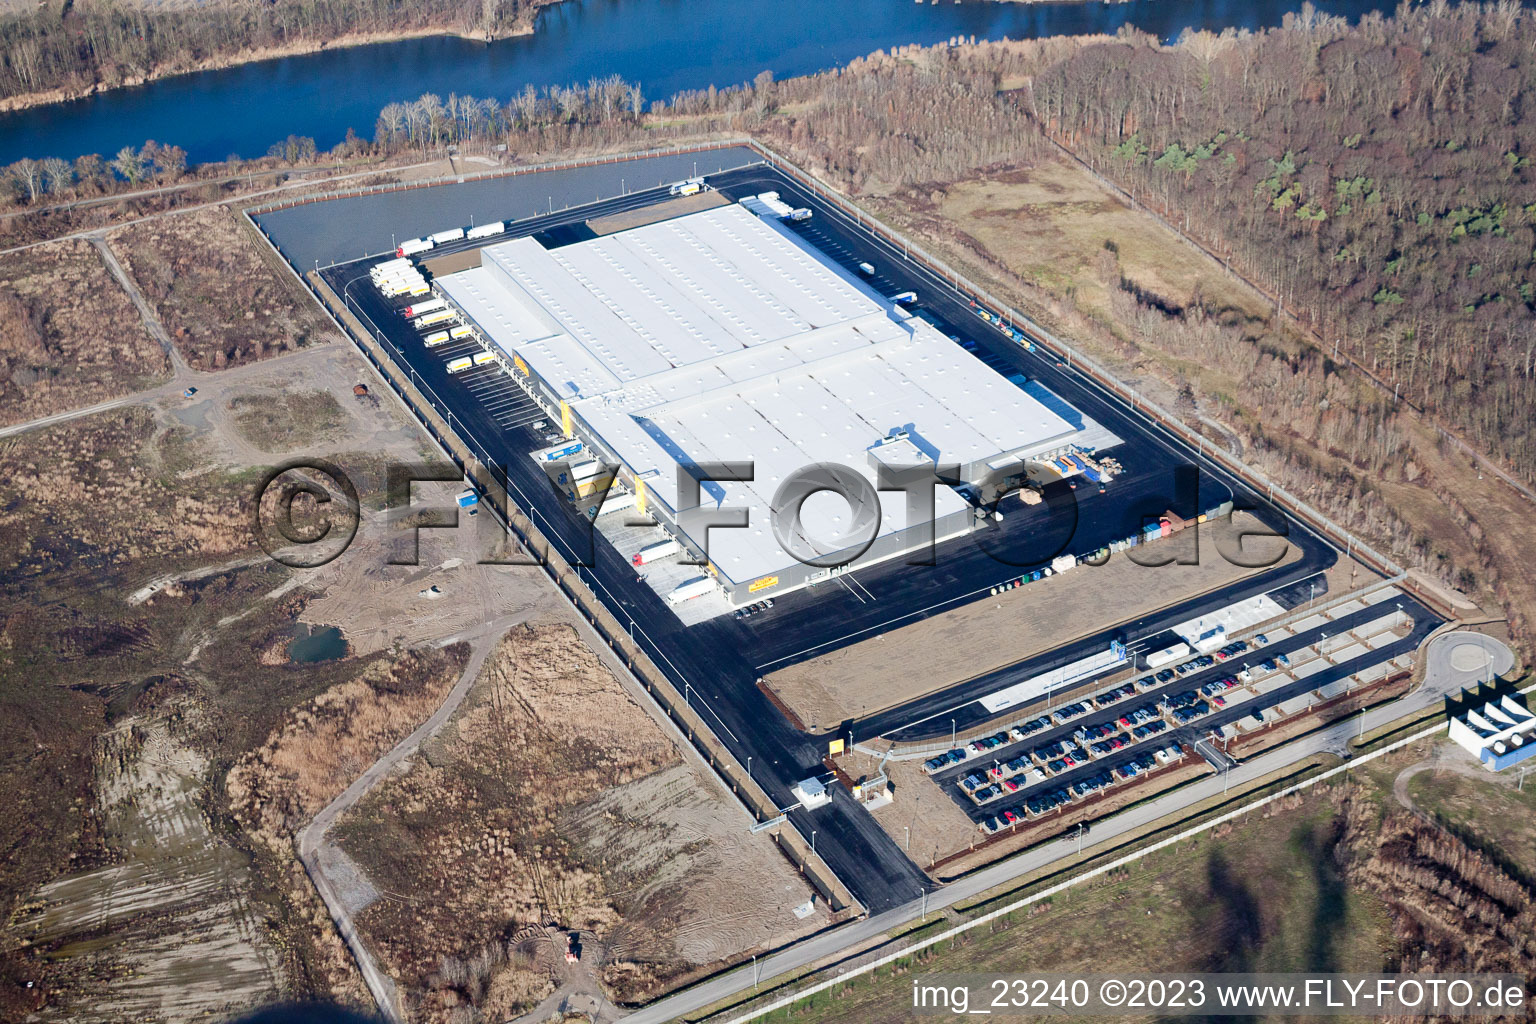 Aerial view of New Netto logistics center in the Oberwald industrial area in Wörth am Rhein in the state Rhineland-Palatinate, Germany